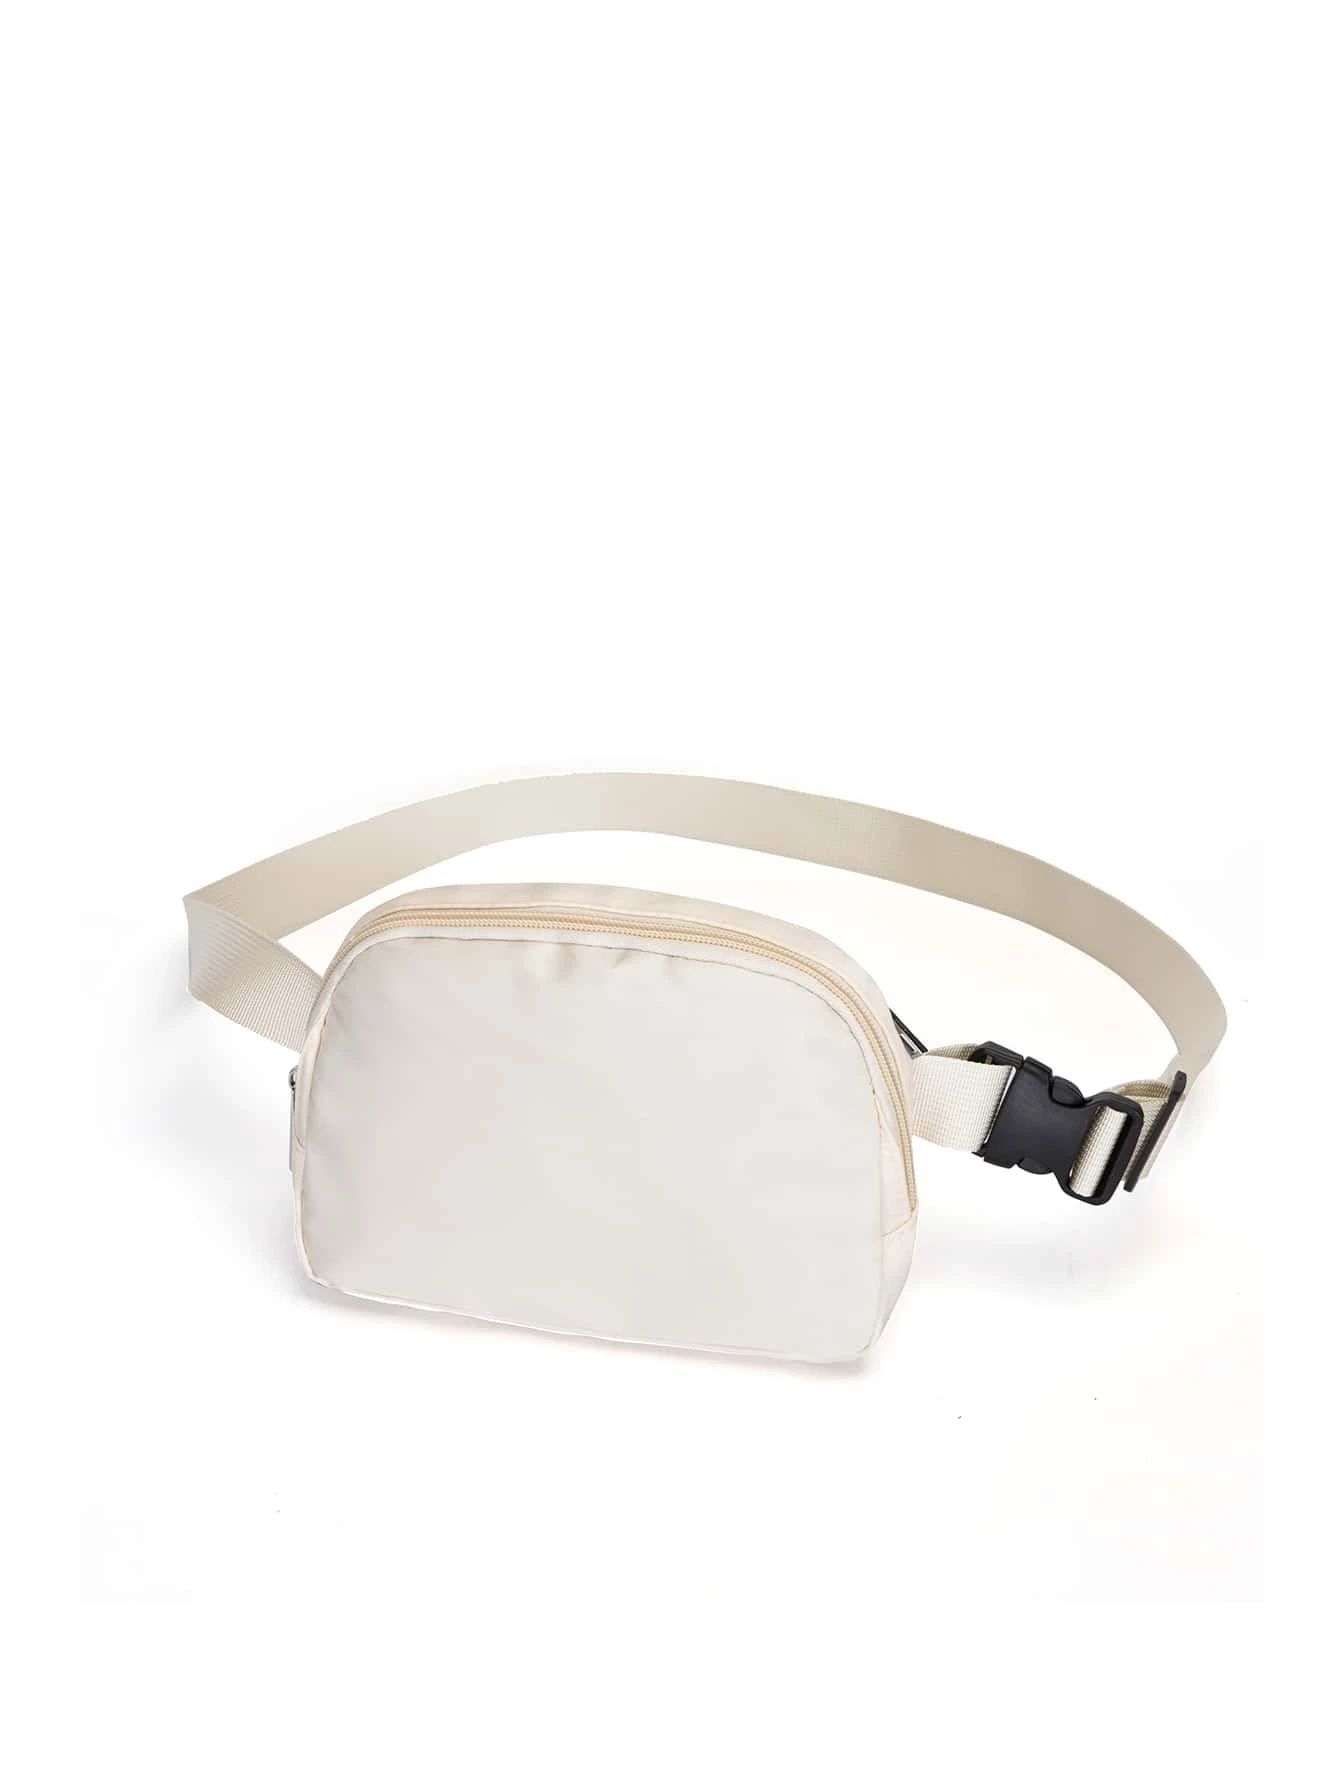 Minimalist Fanny Pack SKU: sg2209249117162561(500+ Reviews)$6.00Make 4 payments of $1.50 $5.70Joi... | SHEIN